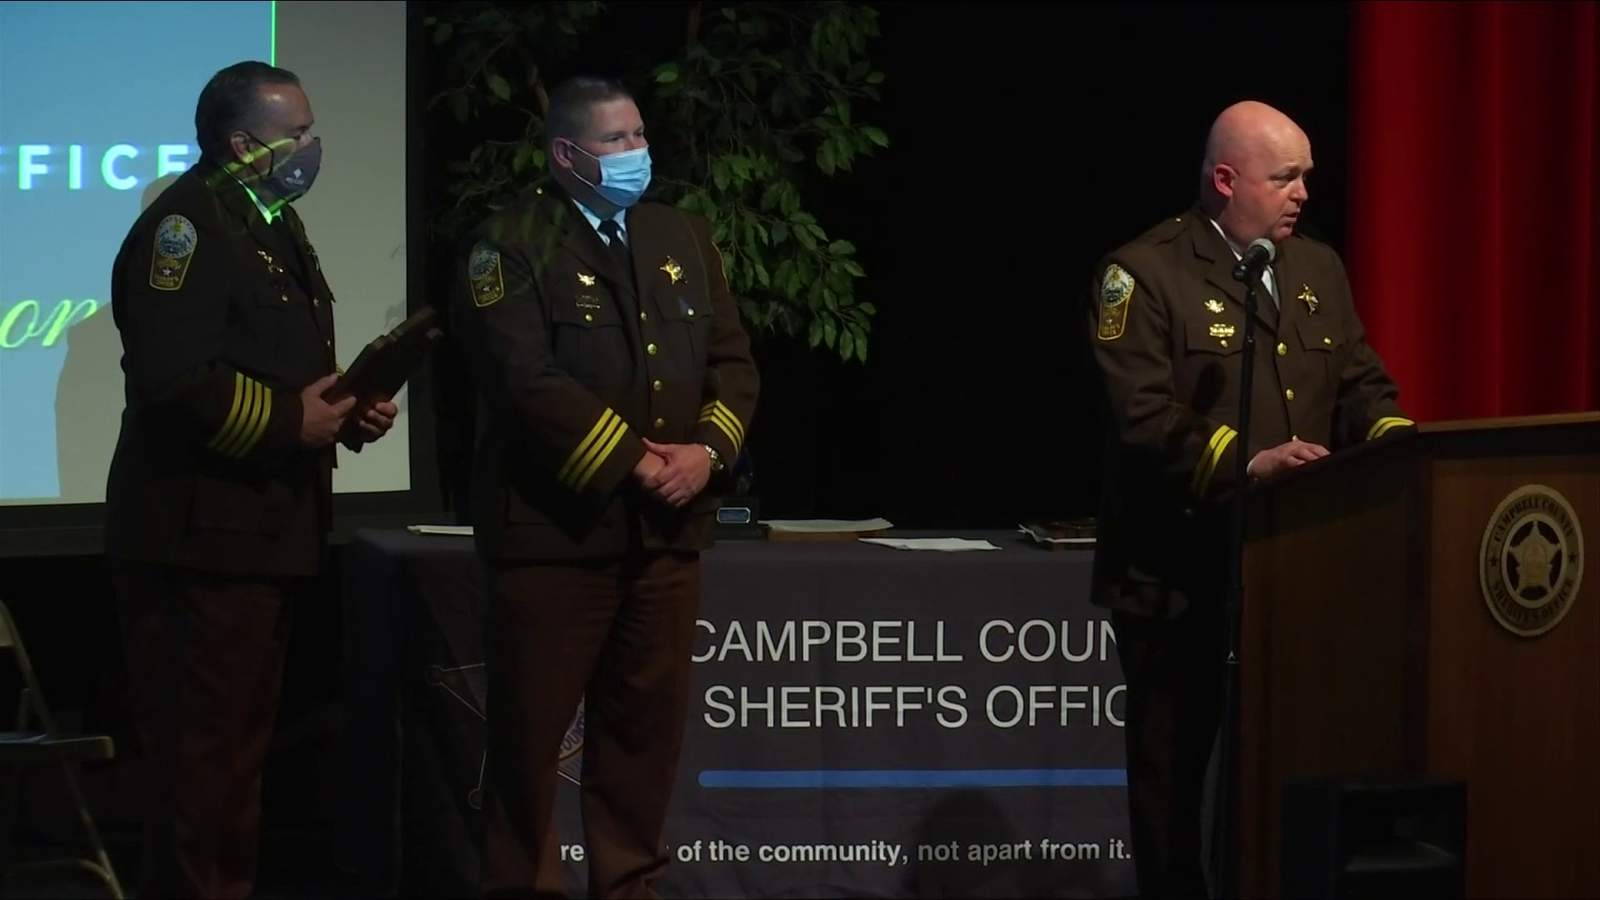 Campbell County Sheriff’s Office recognizes members for service